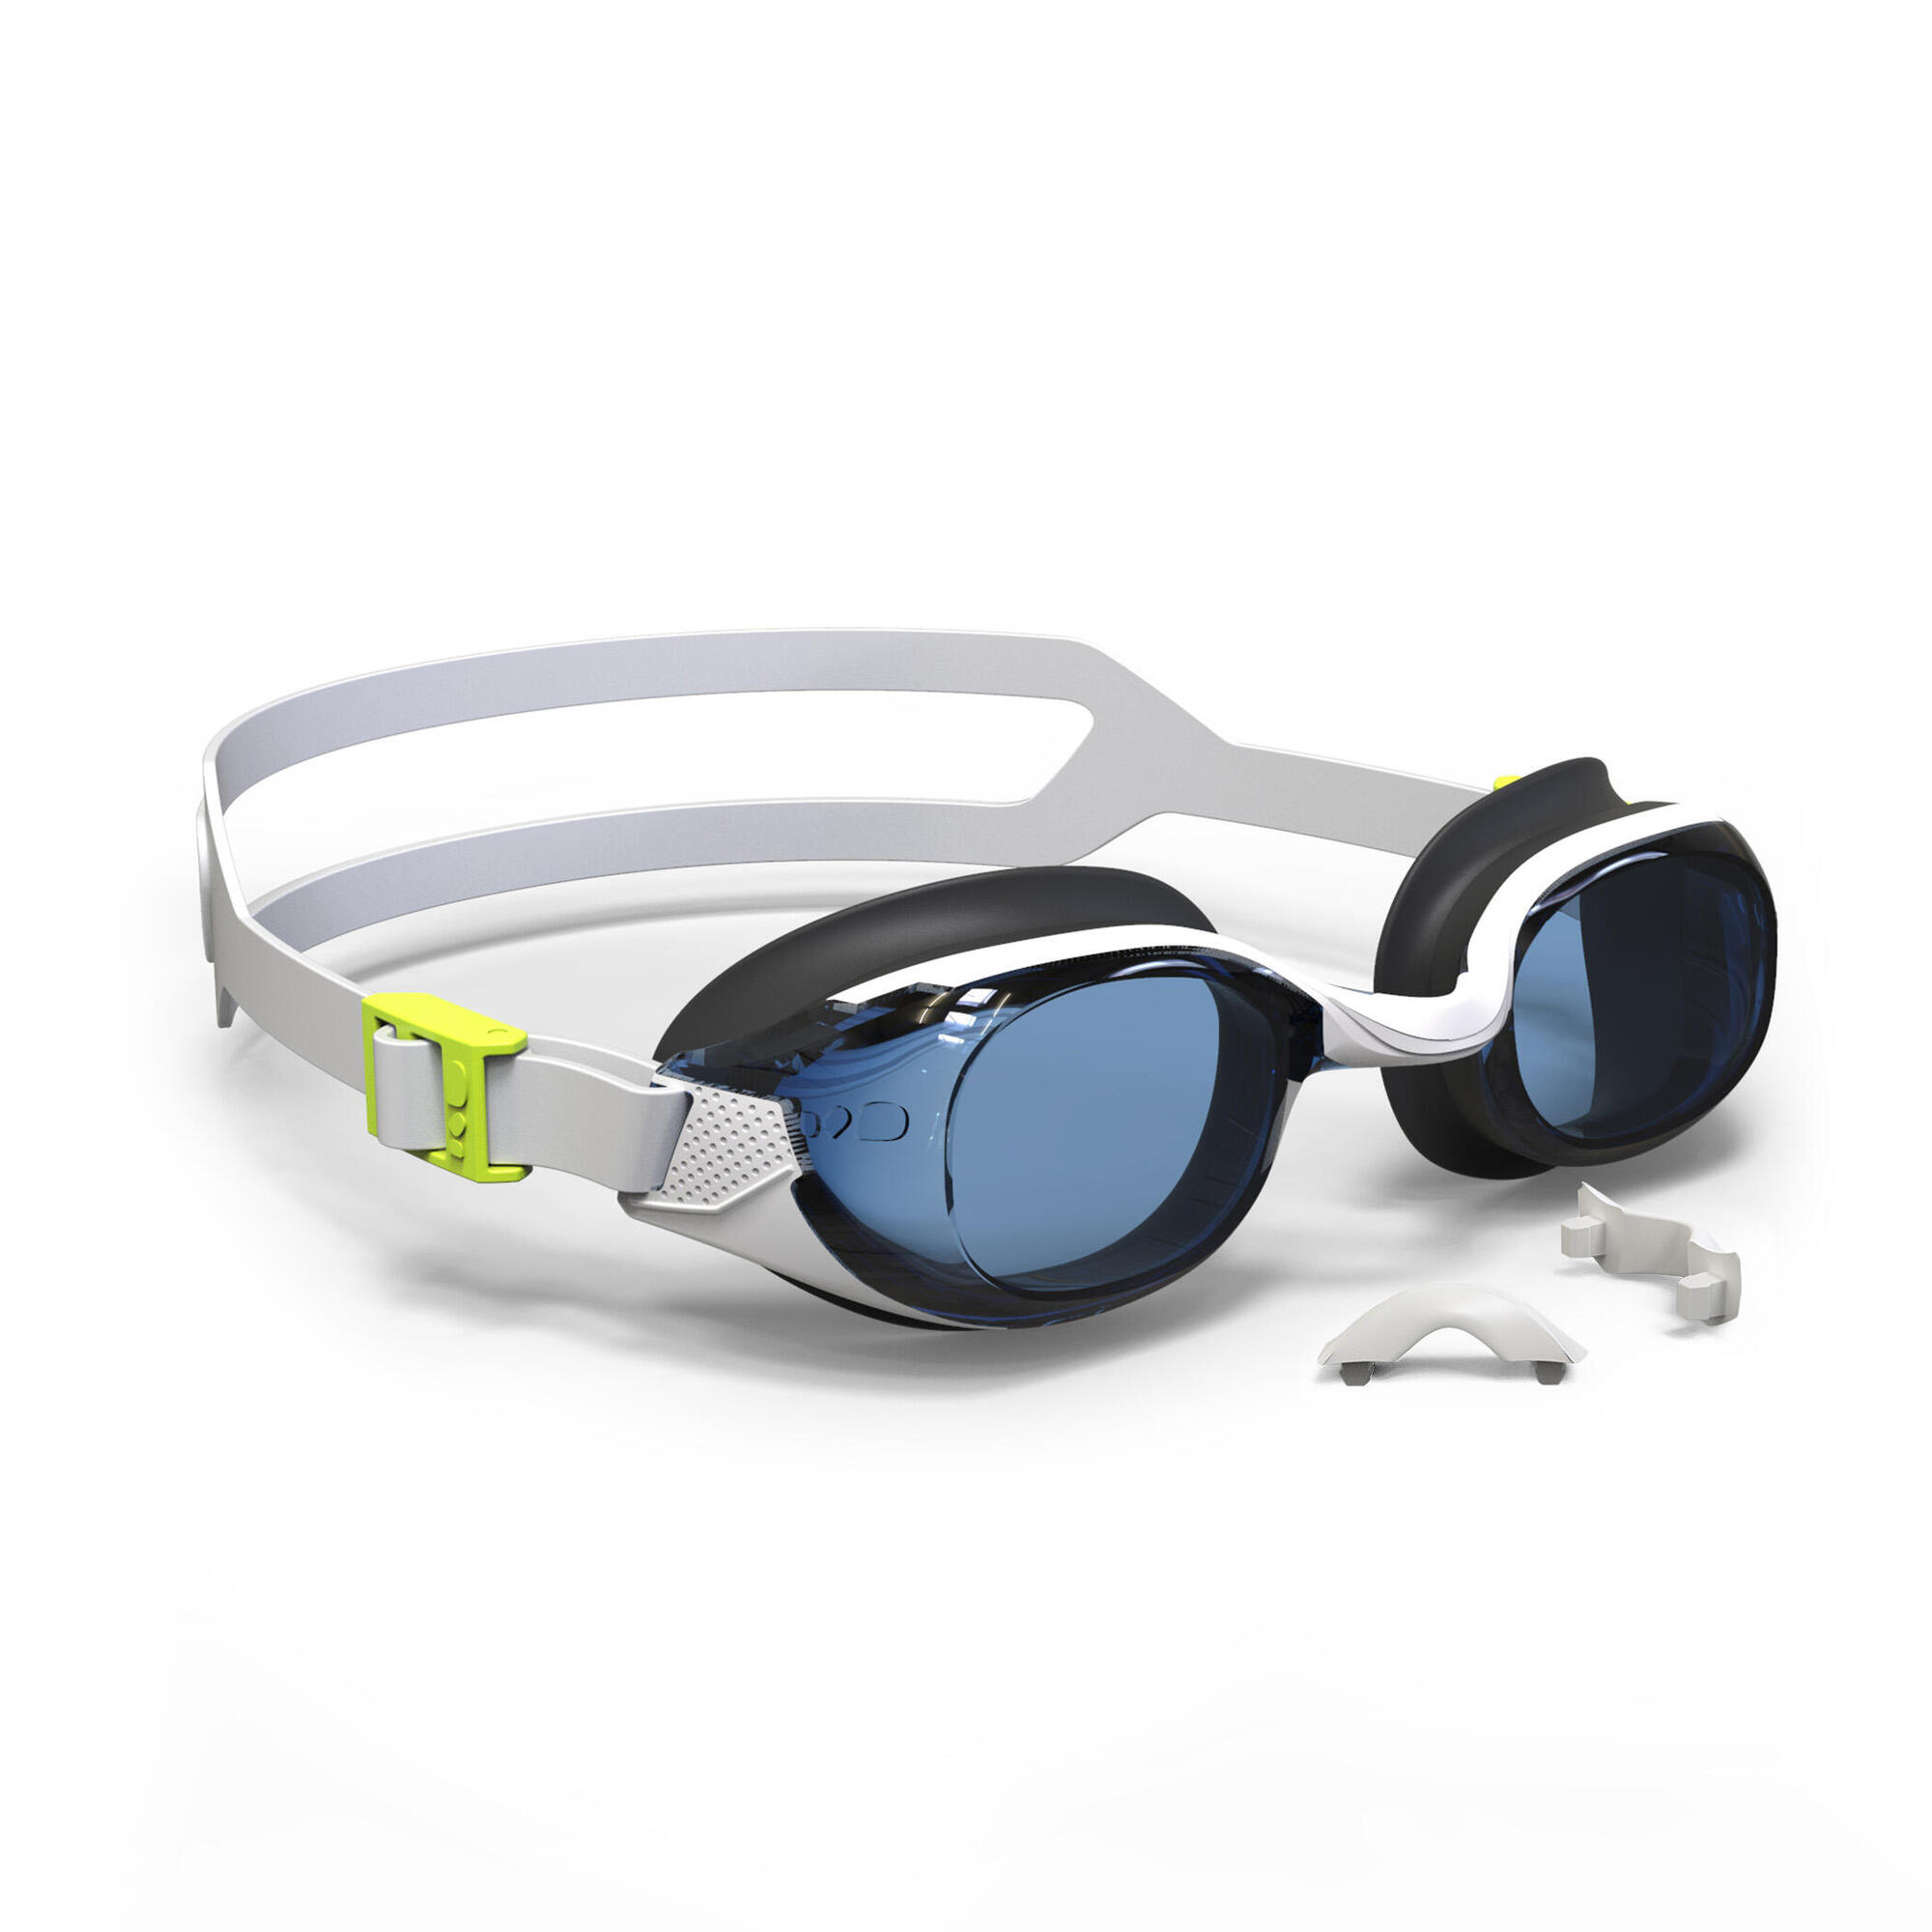 SWIMMING GOGGLES 500 B-FIT CLEAR LENSES 